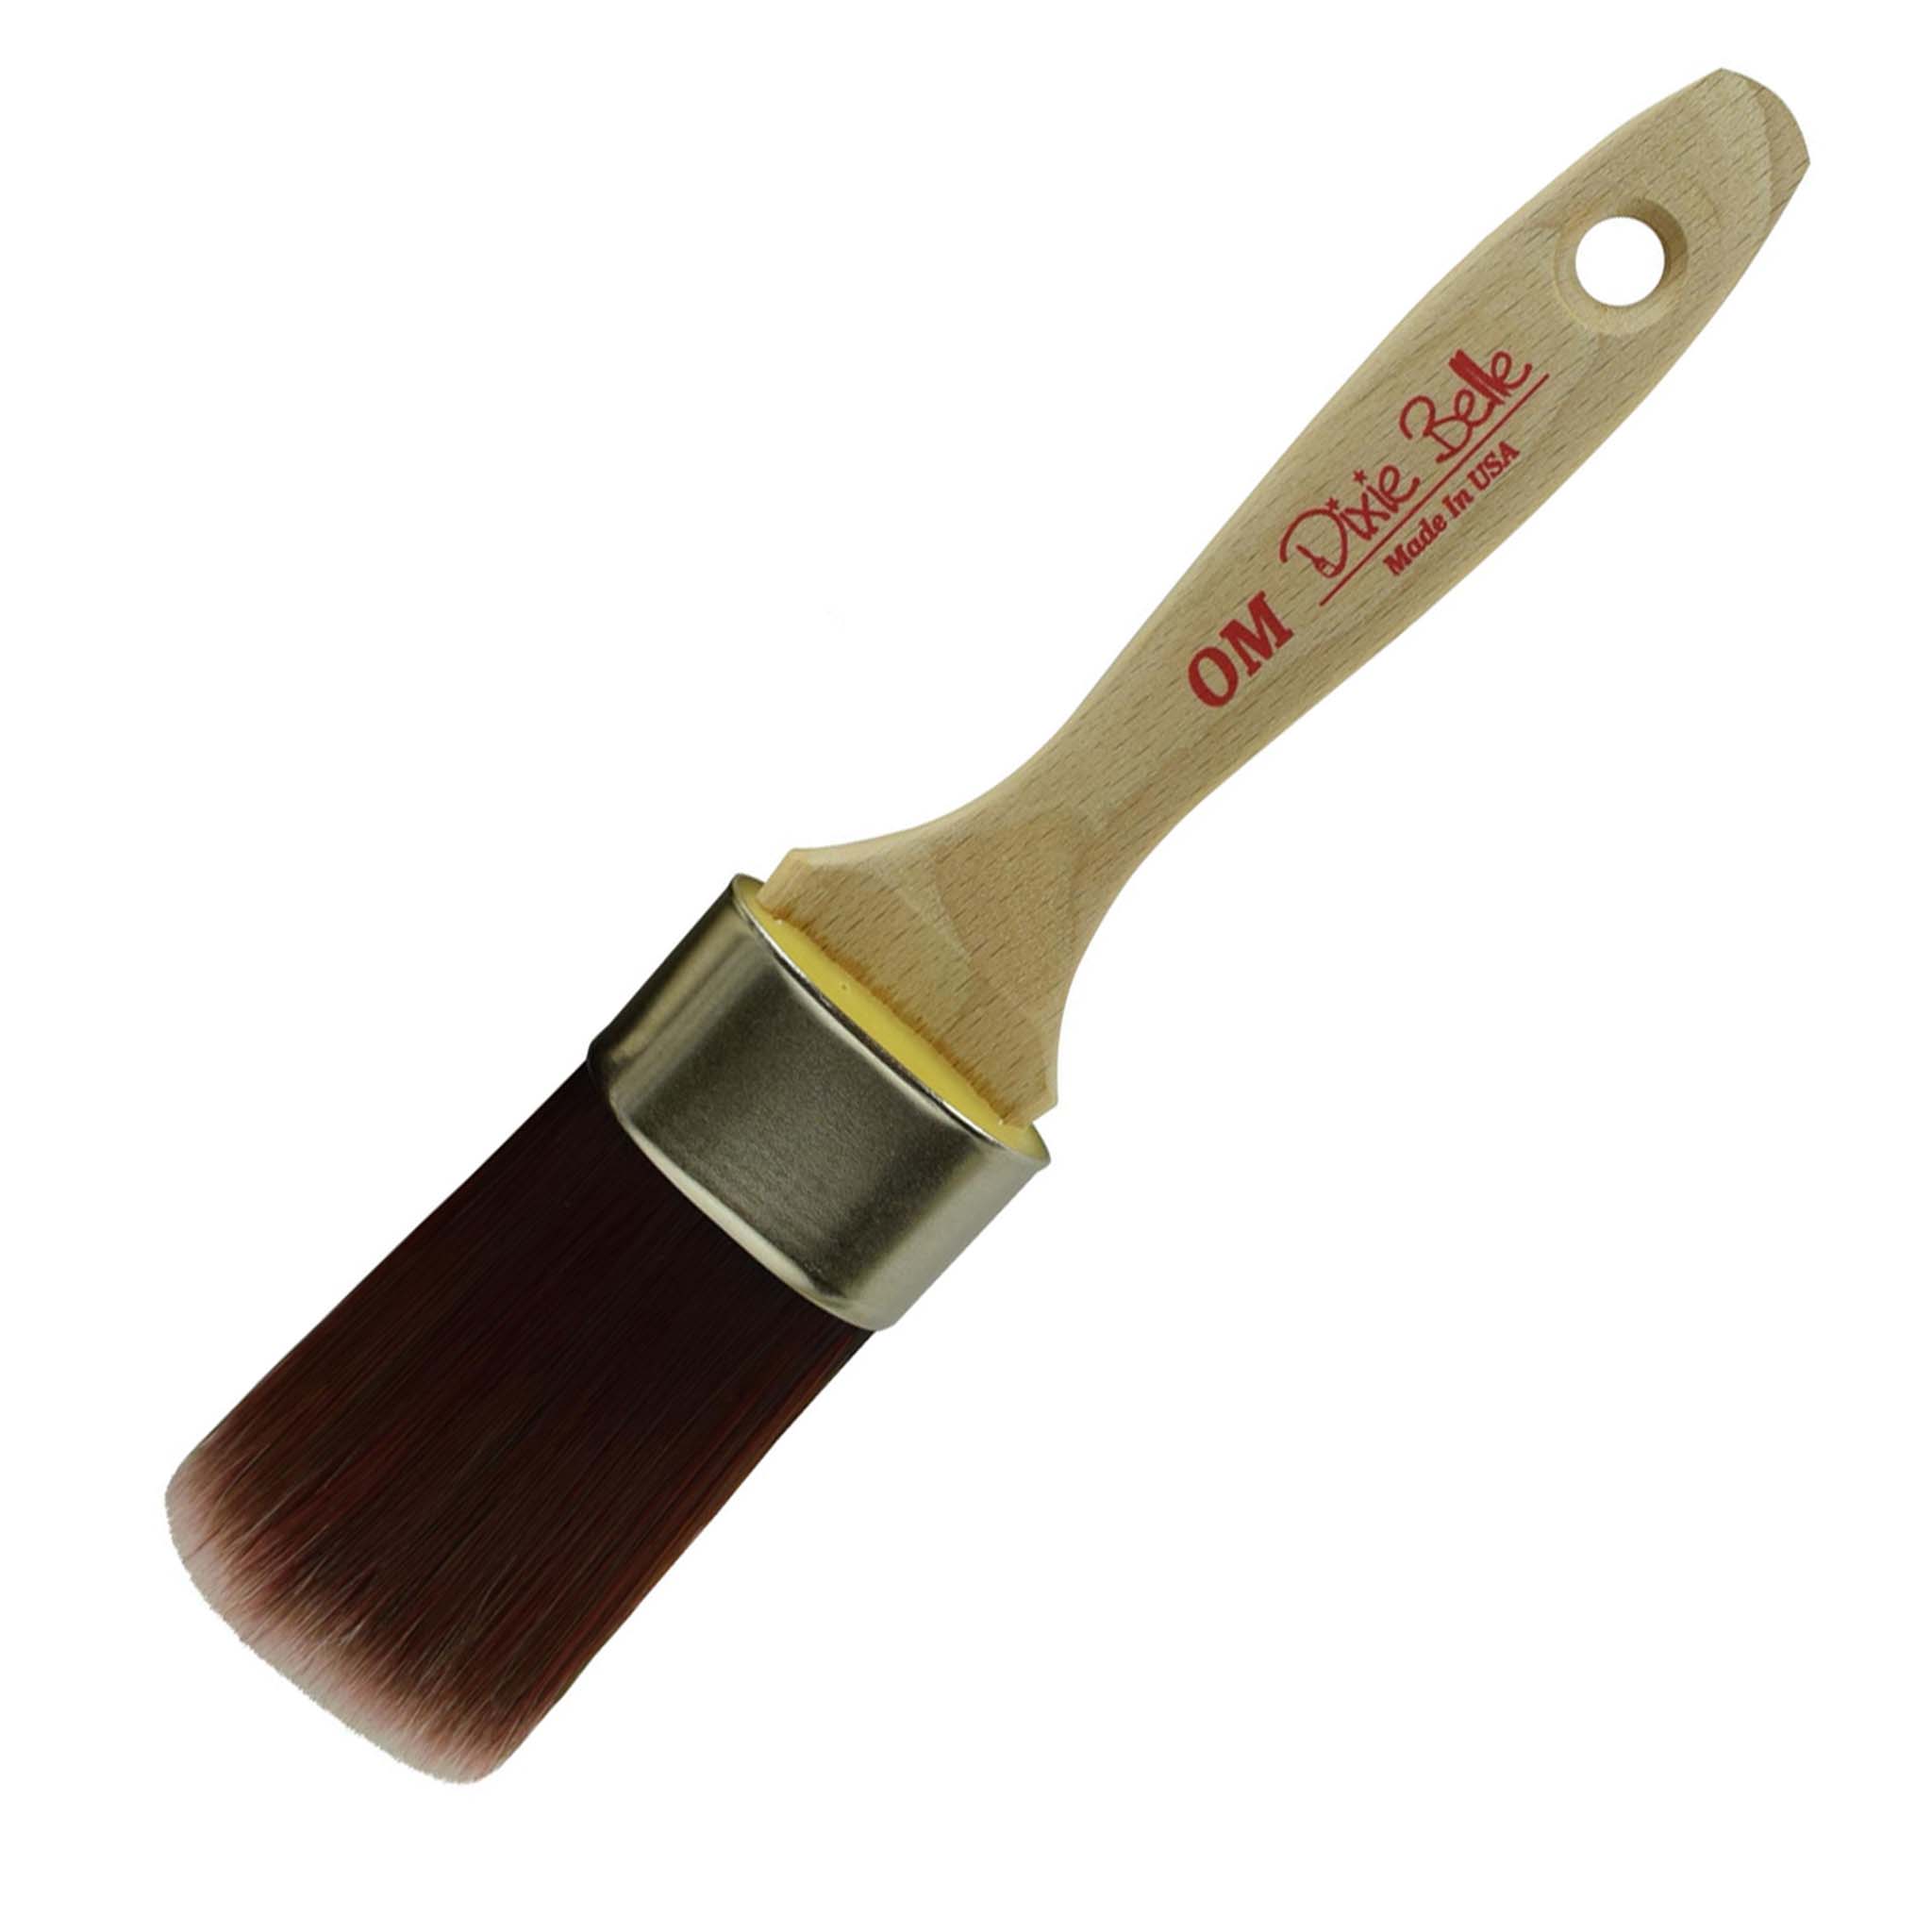 Dixie Belle Paint Company's Synthetic Oval Medium Paint Brush is against a white background.